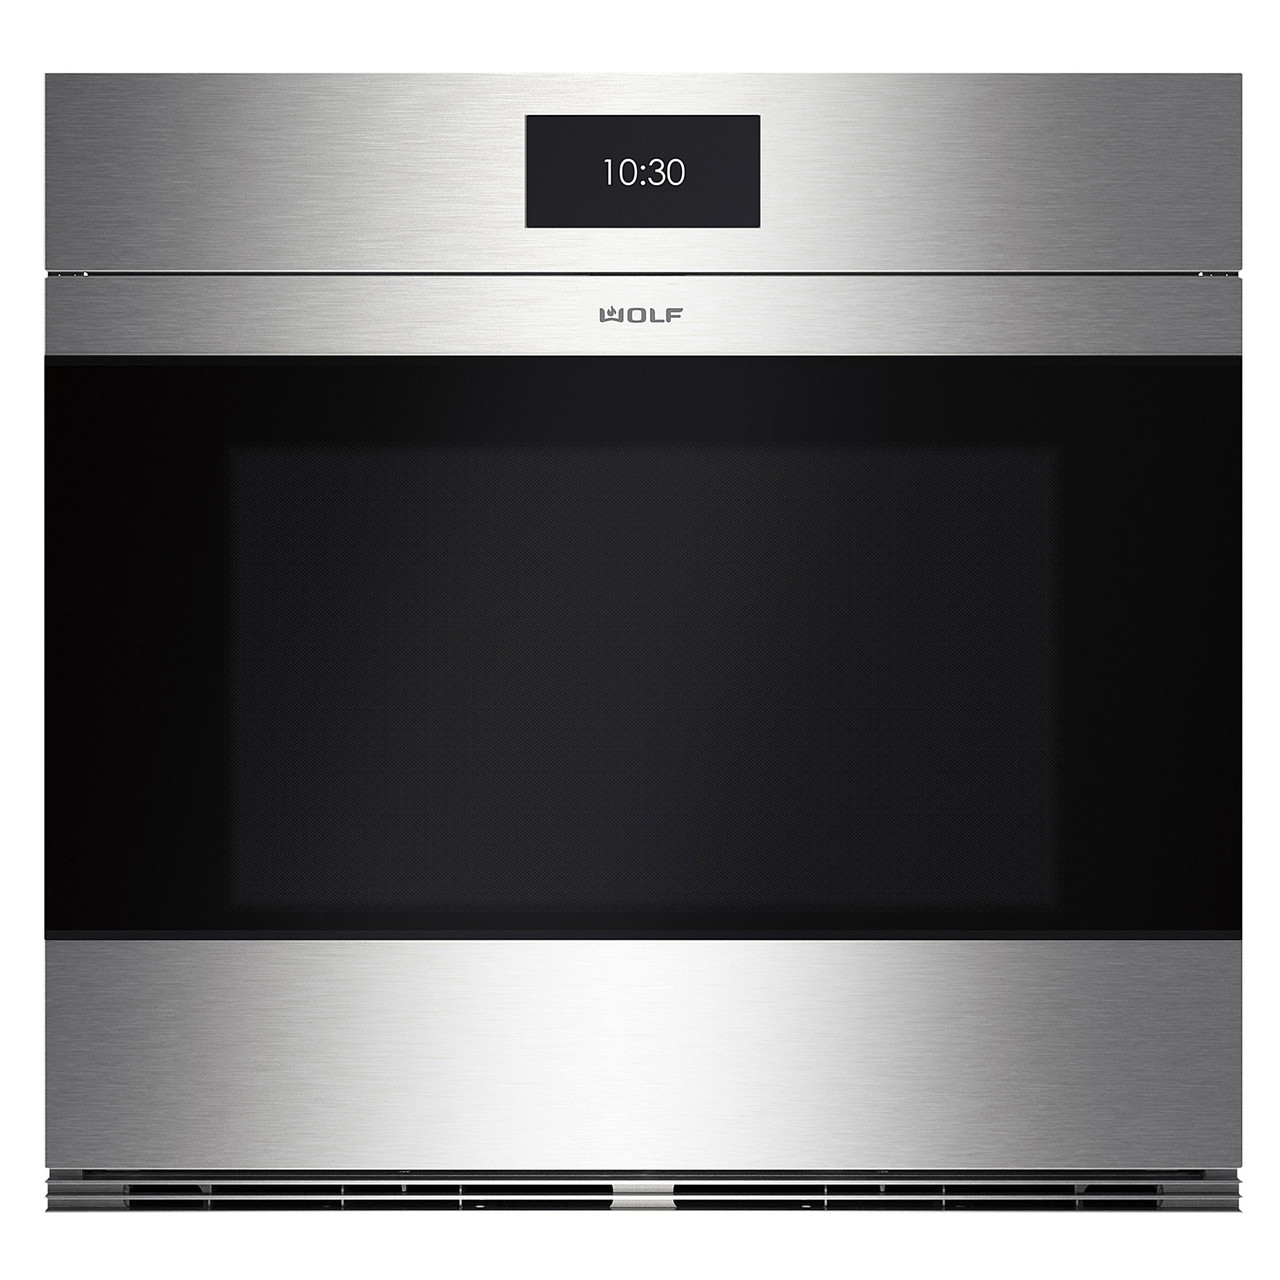 ICBSO30CMS - 76cm Contemporary M Series Multifunction Oven, Handless - Stainless Steel